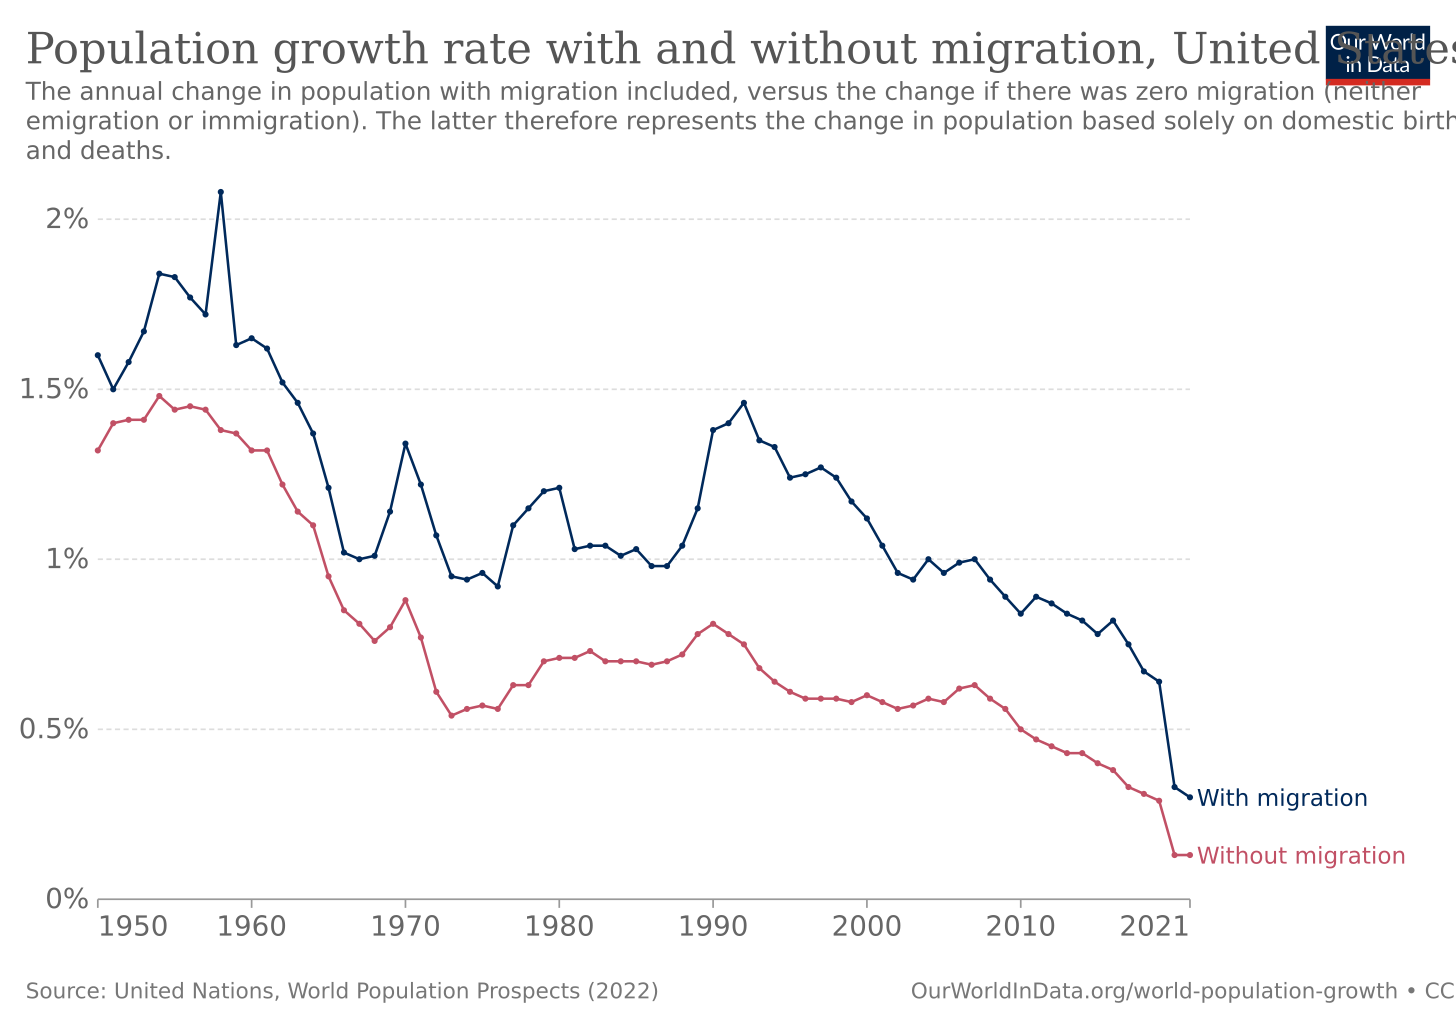 Population growth rate with and without migration, United States